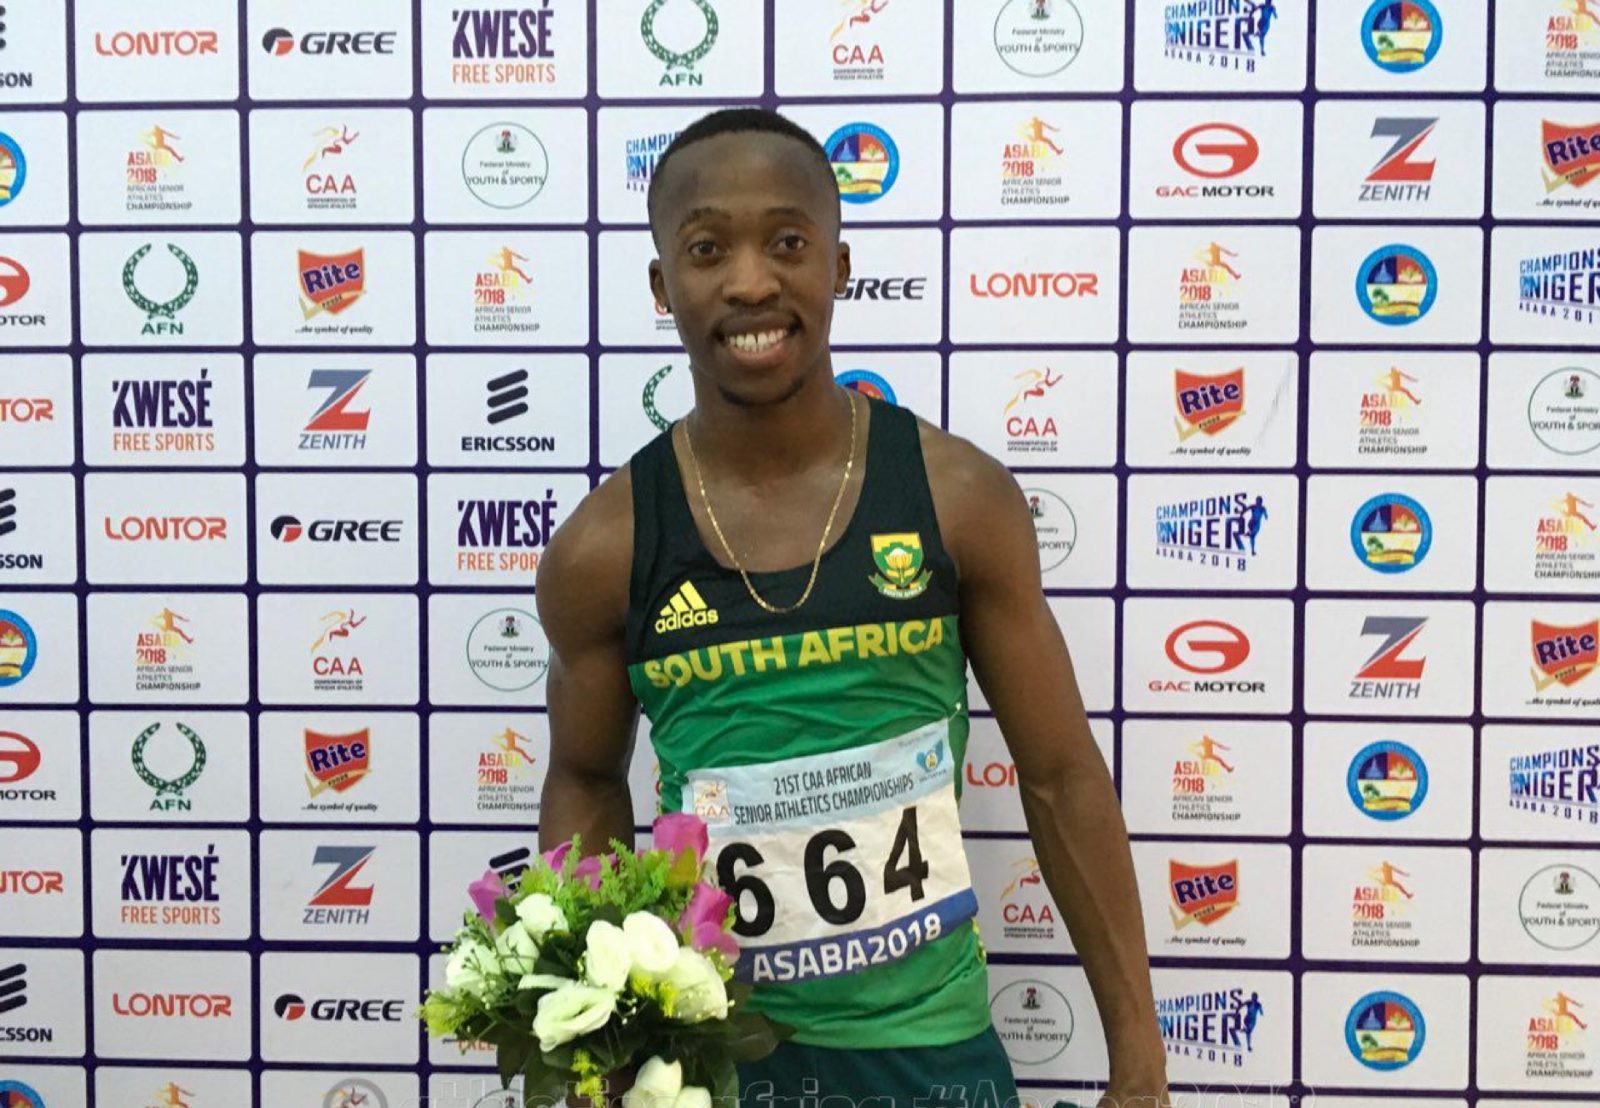 South Africa's Thapelo Phora after taking silver medal in the men's 400m at the 2018 African Senior Championships in Asaba / Photo credit: Yomi Omogbeja